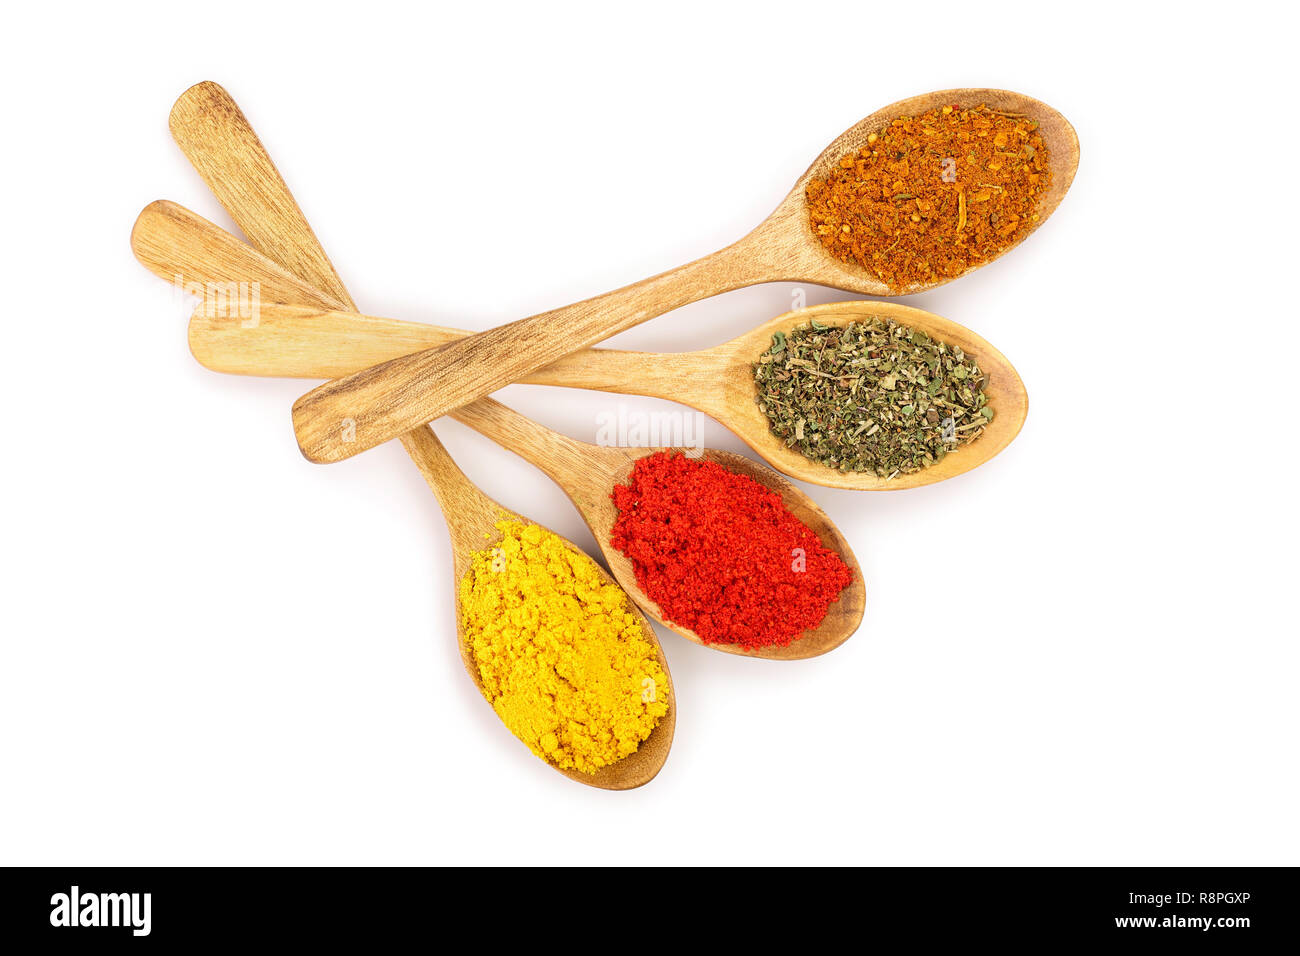 https://c8.alamy.com/comp/R8PGXP/mix-of-spices-in-wooden-spoon-isolated-on-a-white-background-top-view-flat-lay-set-or-collection-R8PGXP.jpg